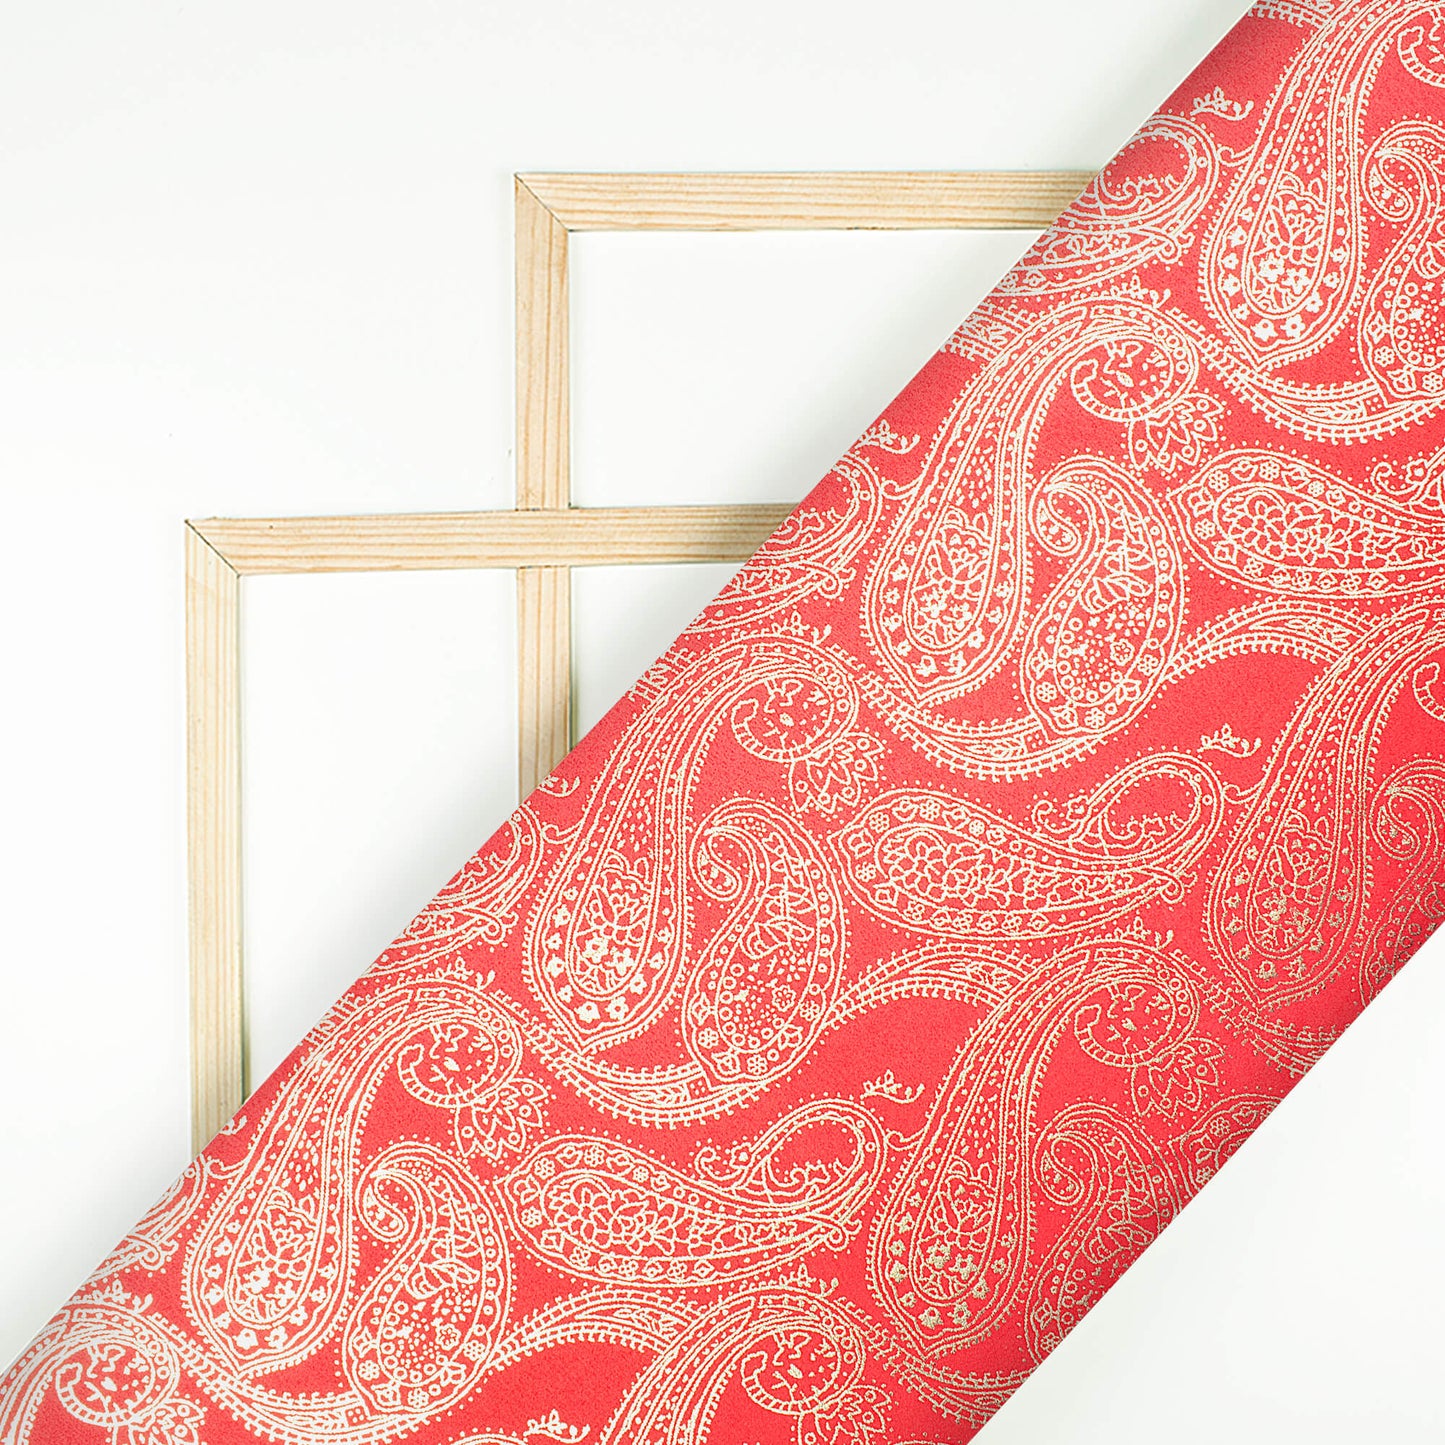 Chilli Red Paisley Pattern Golden Foil Print Butter Silk Satin Fabric (Width 56 Inches)